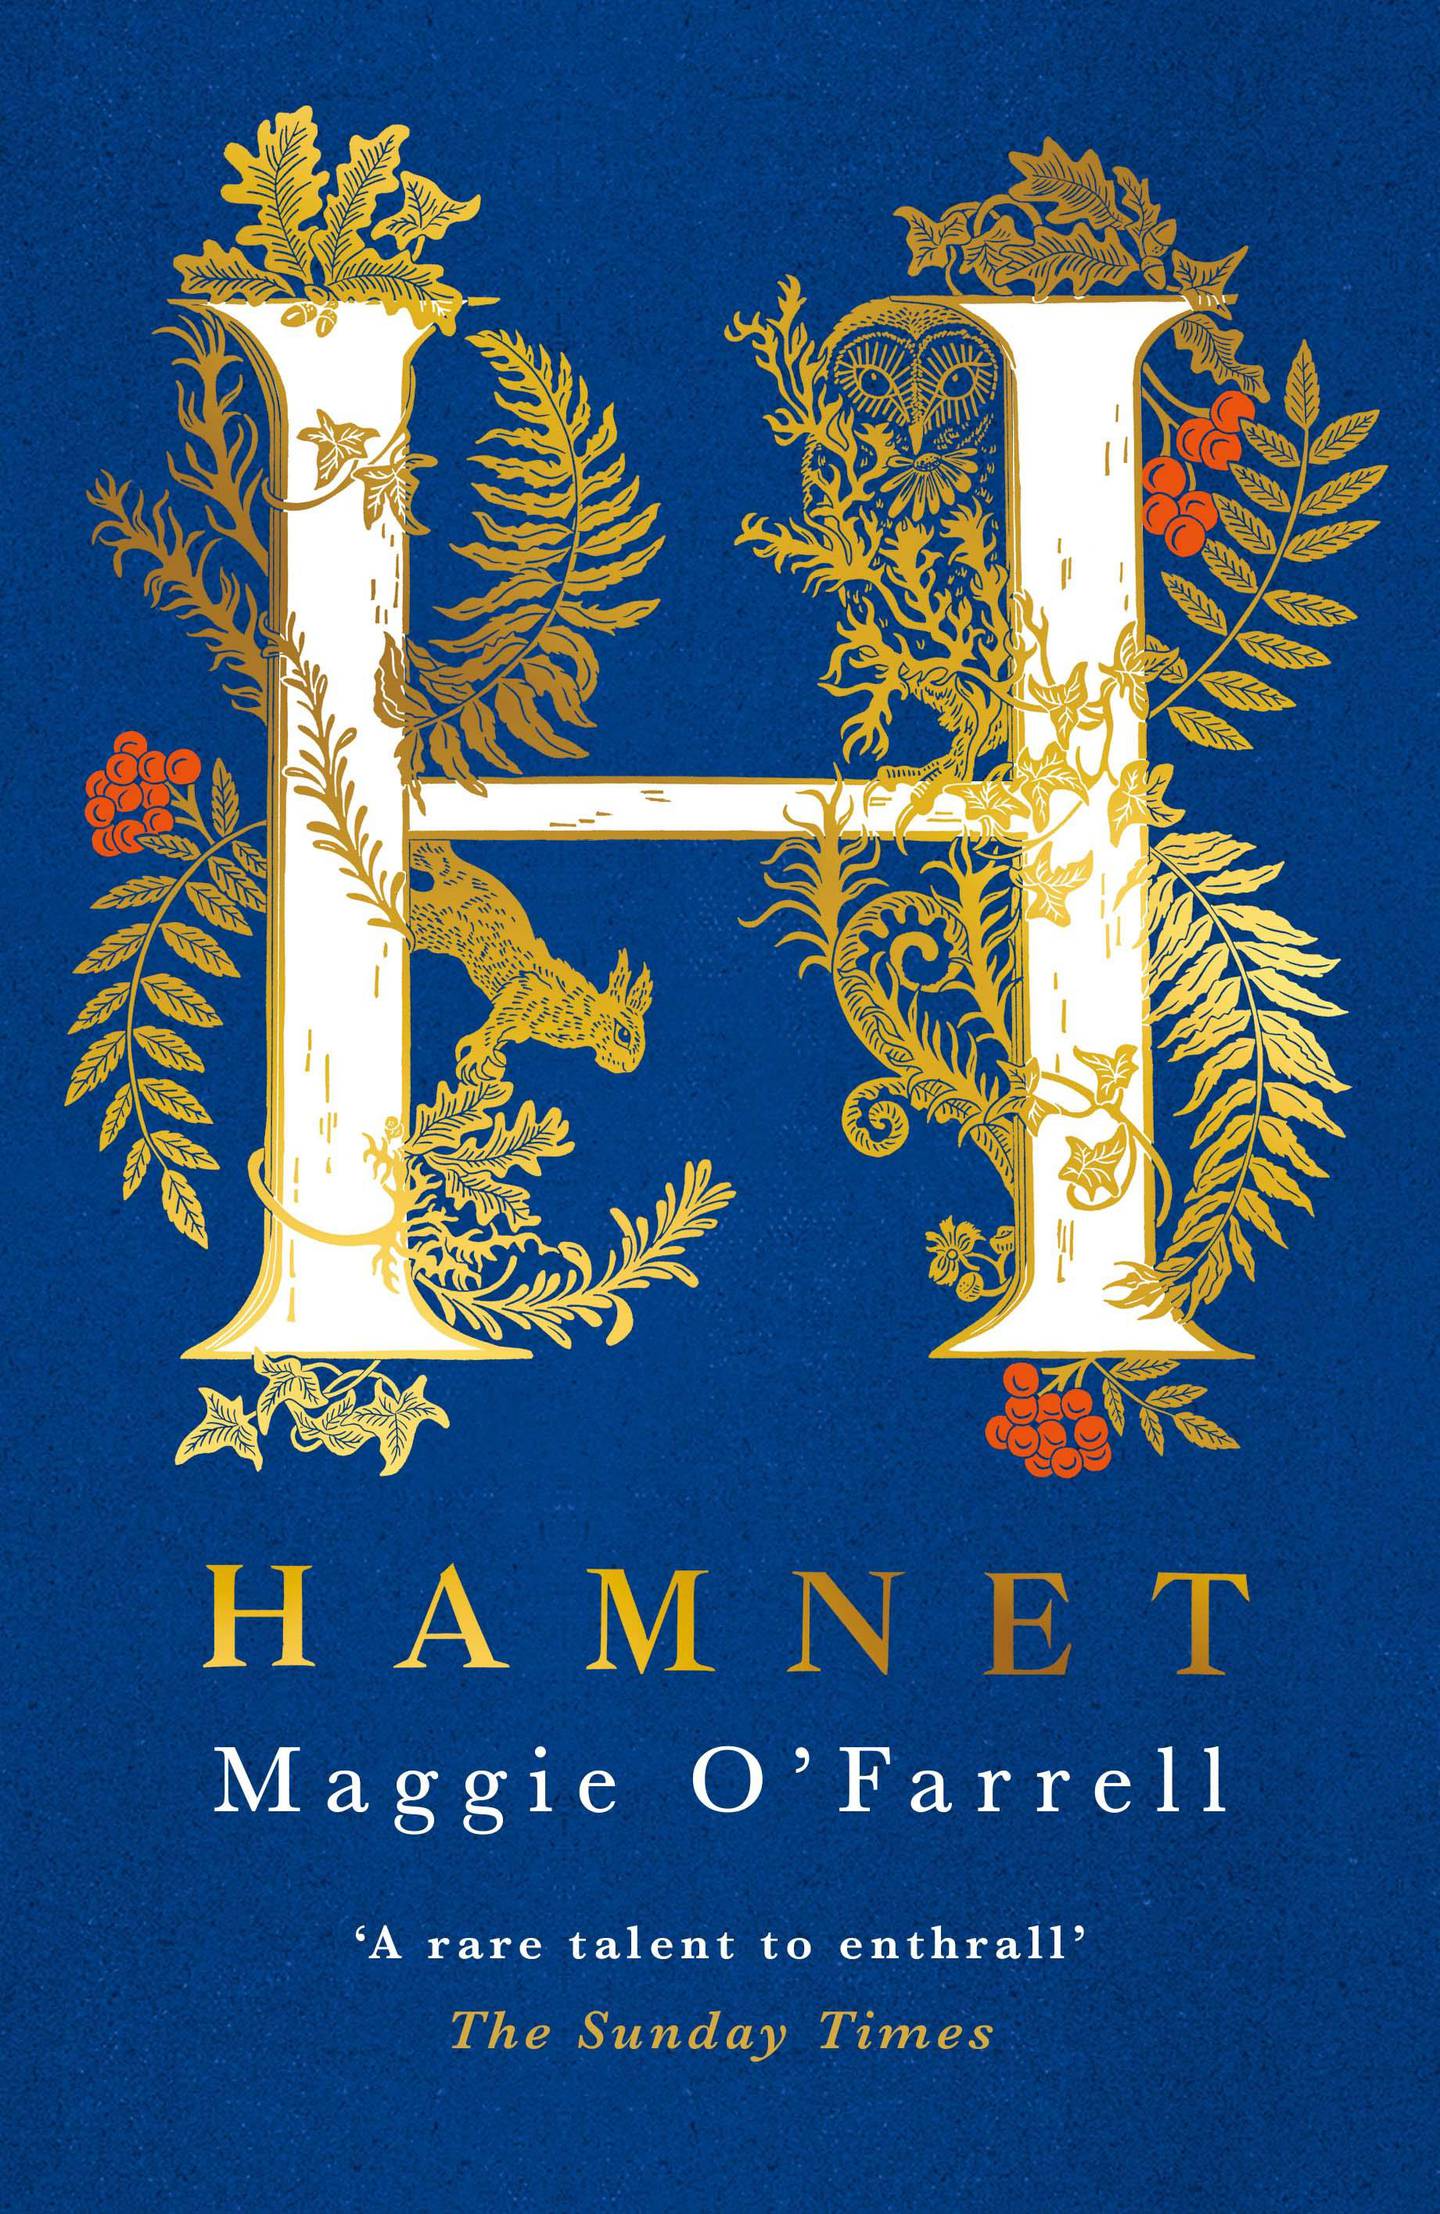 HAMNET by Maggie O’Farrell published by Tinder Press. Courtesy Hachette UK